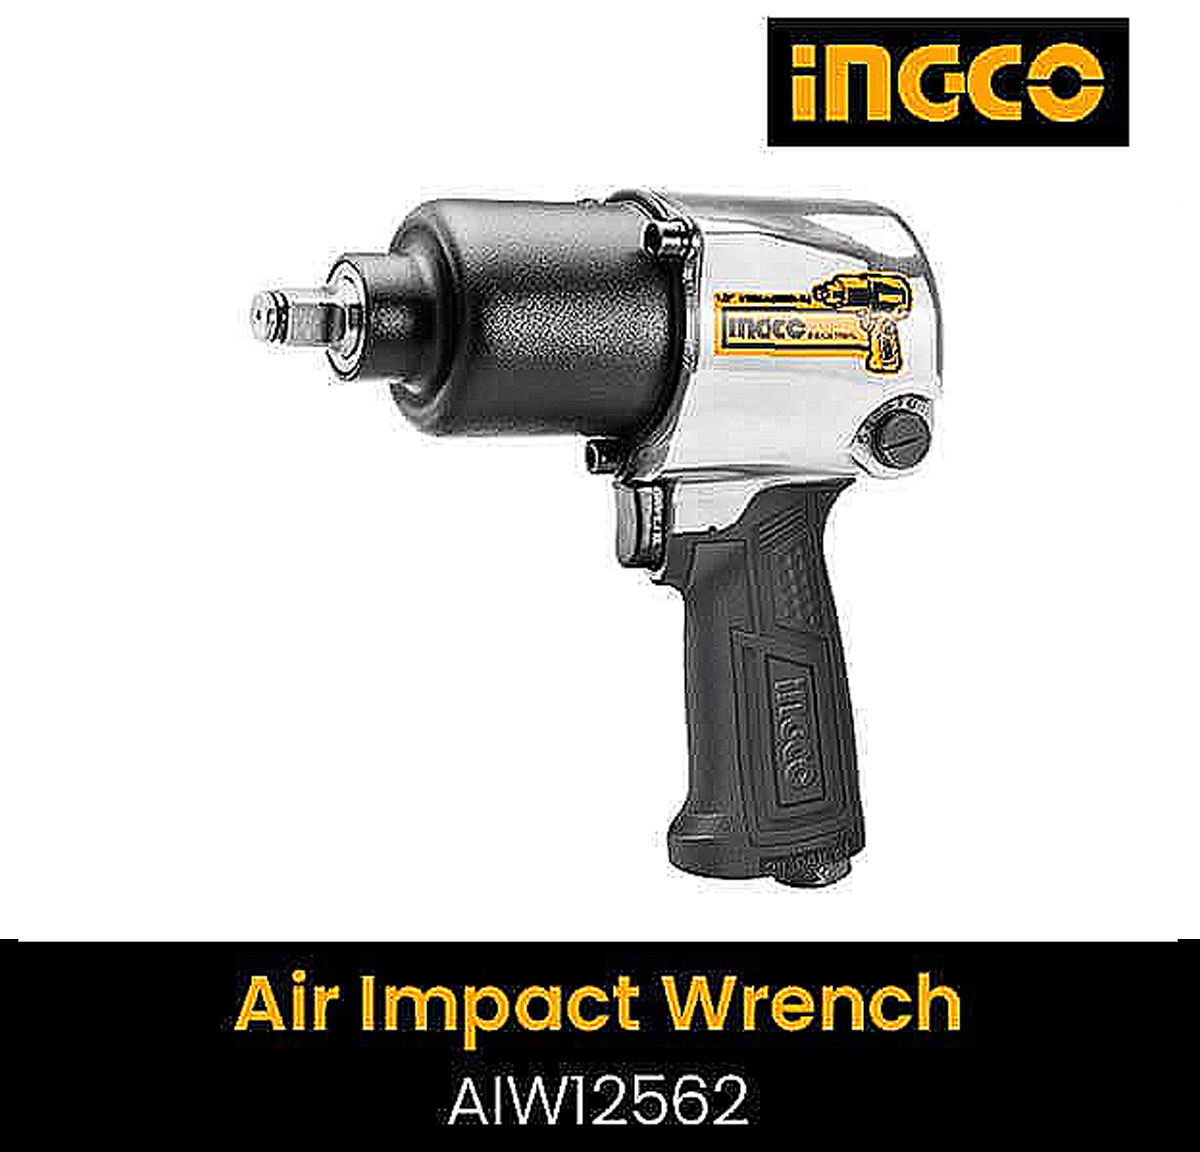 Ingco Air impact wrench 1/2" AIW12562